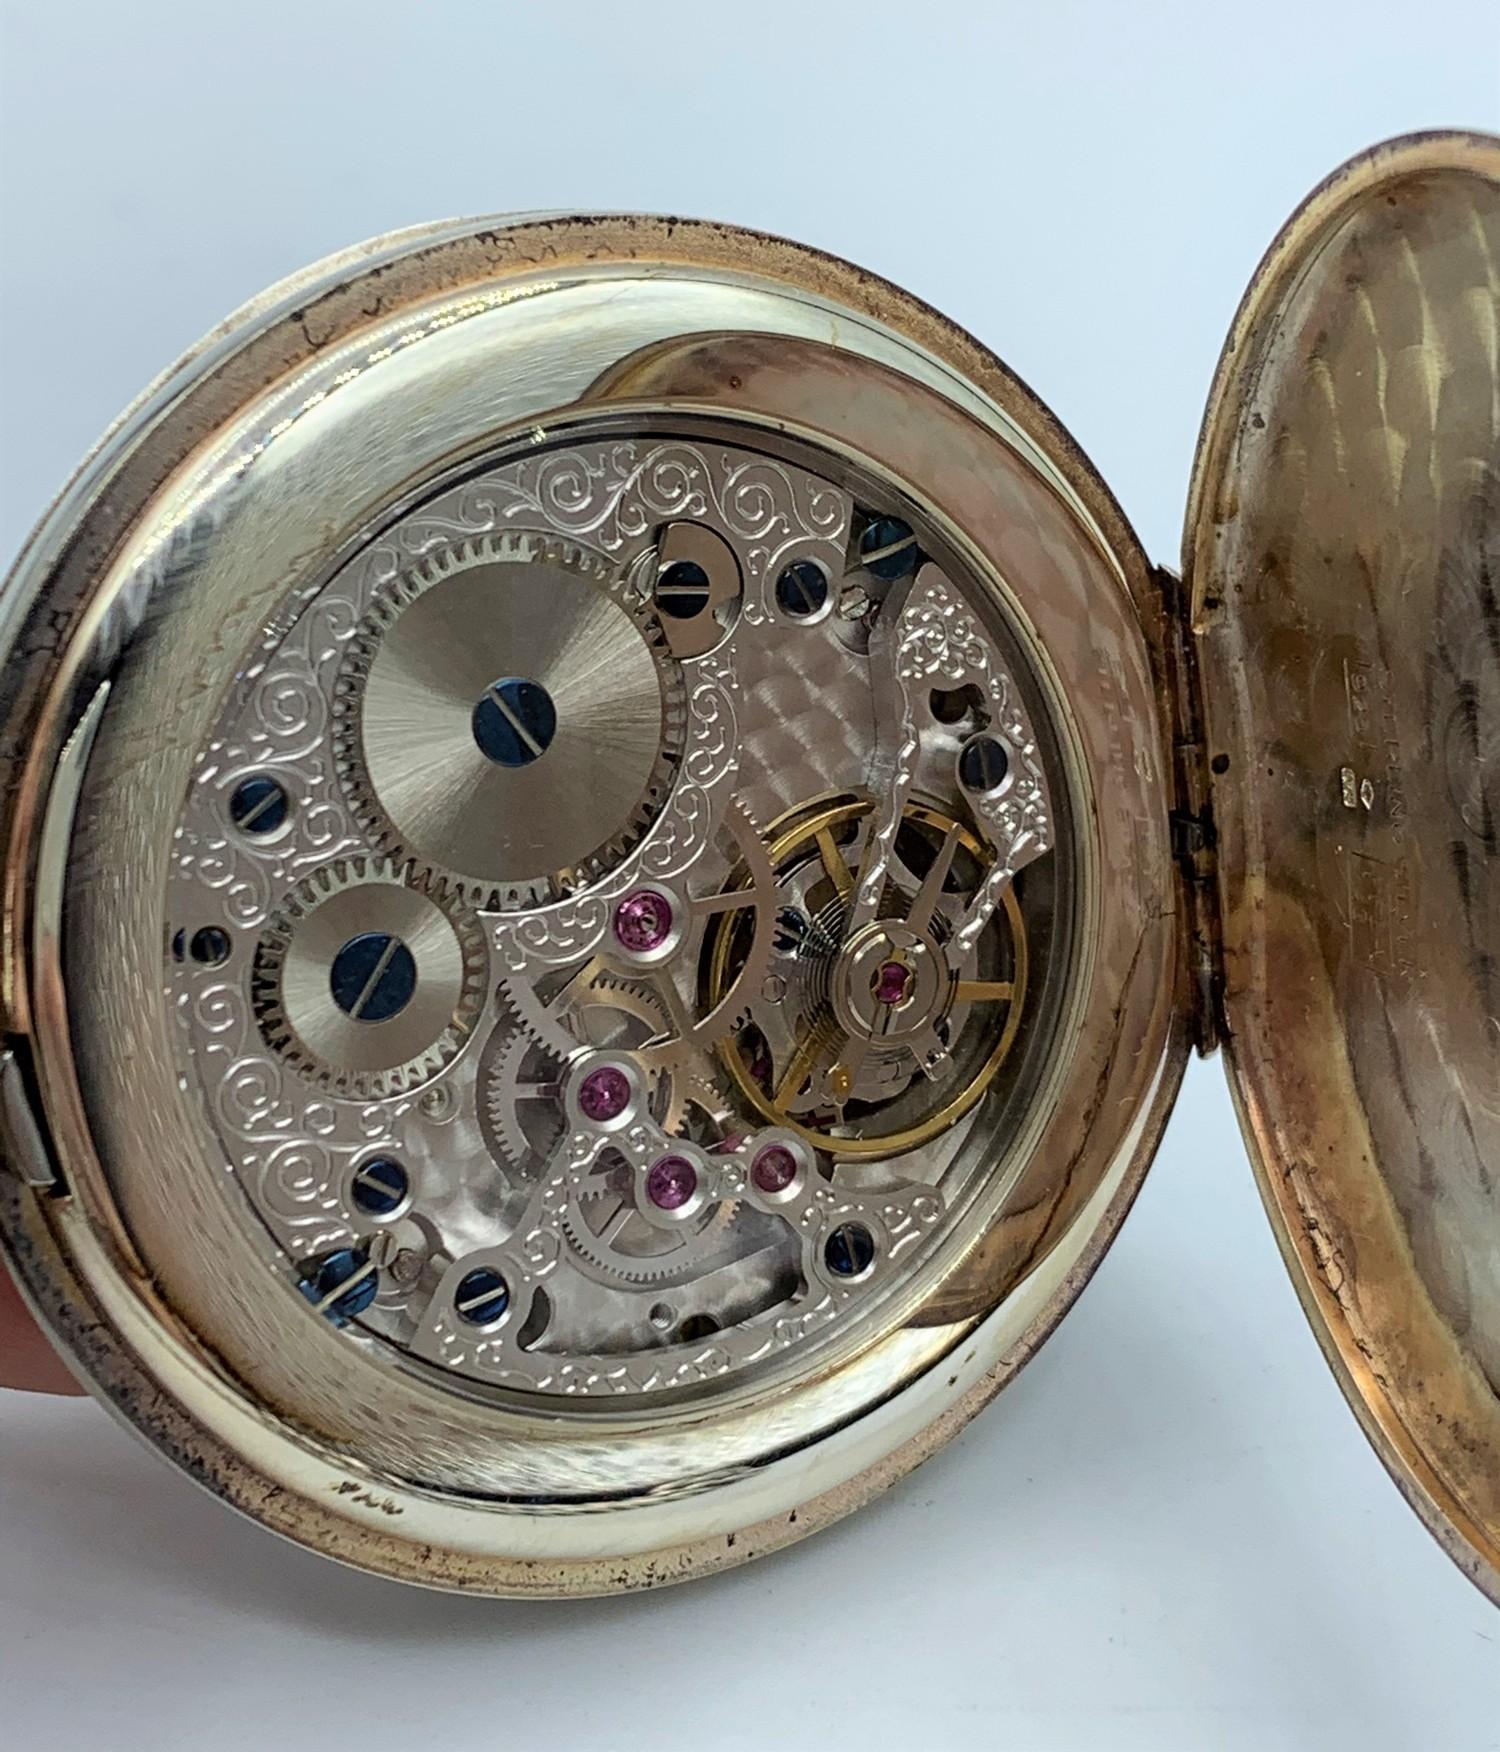 Jaquet Girard Geneve Silver Hunter Pocket Watch with Chains, 17 Jewels Incabloc in working order. - Image 6 of 9